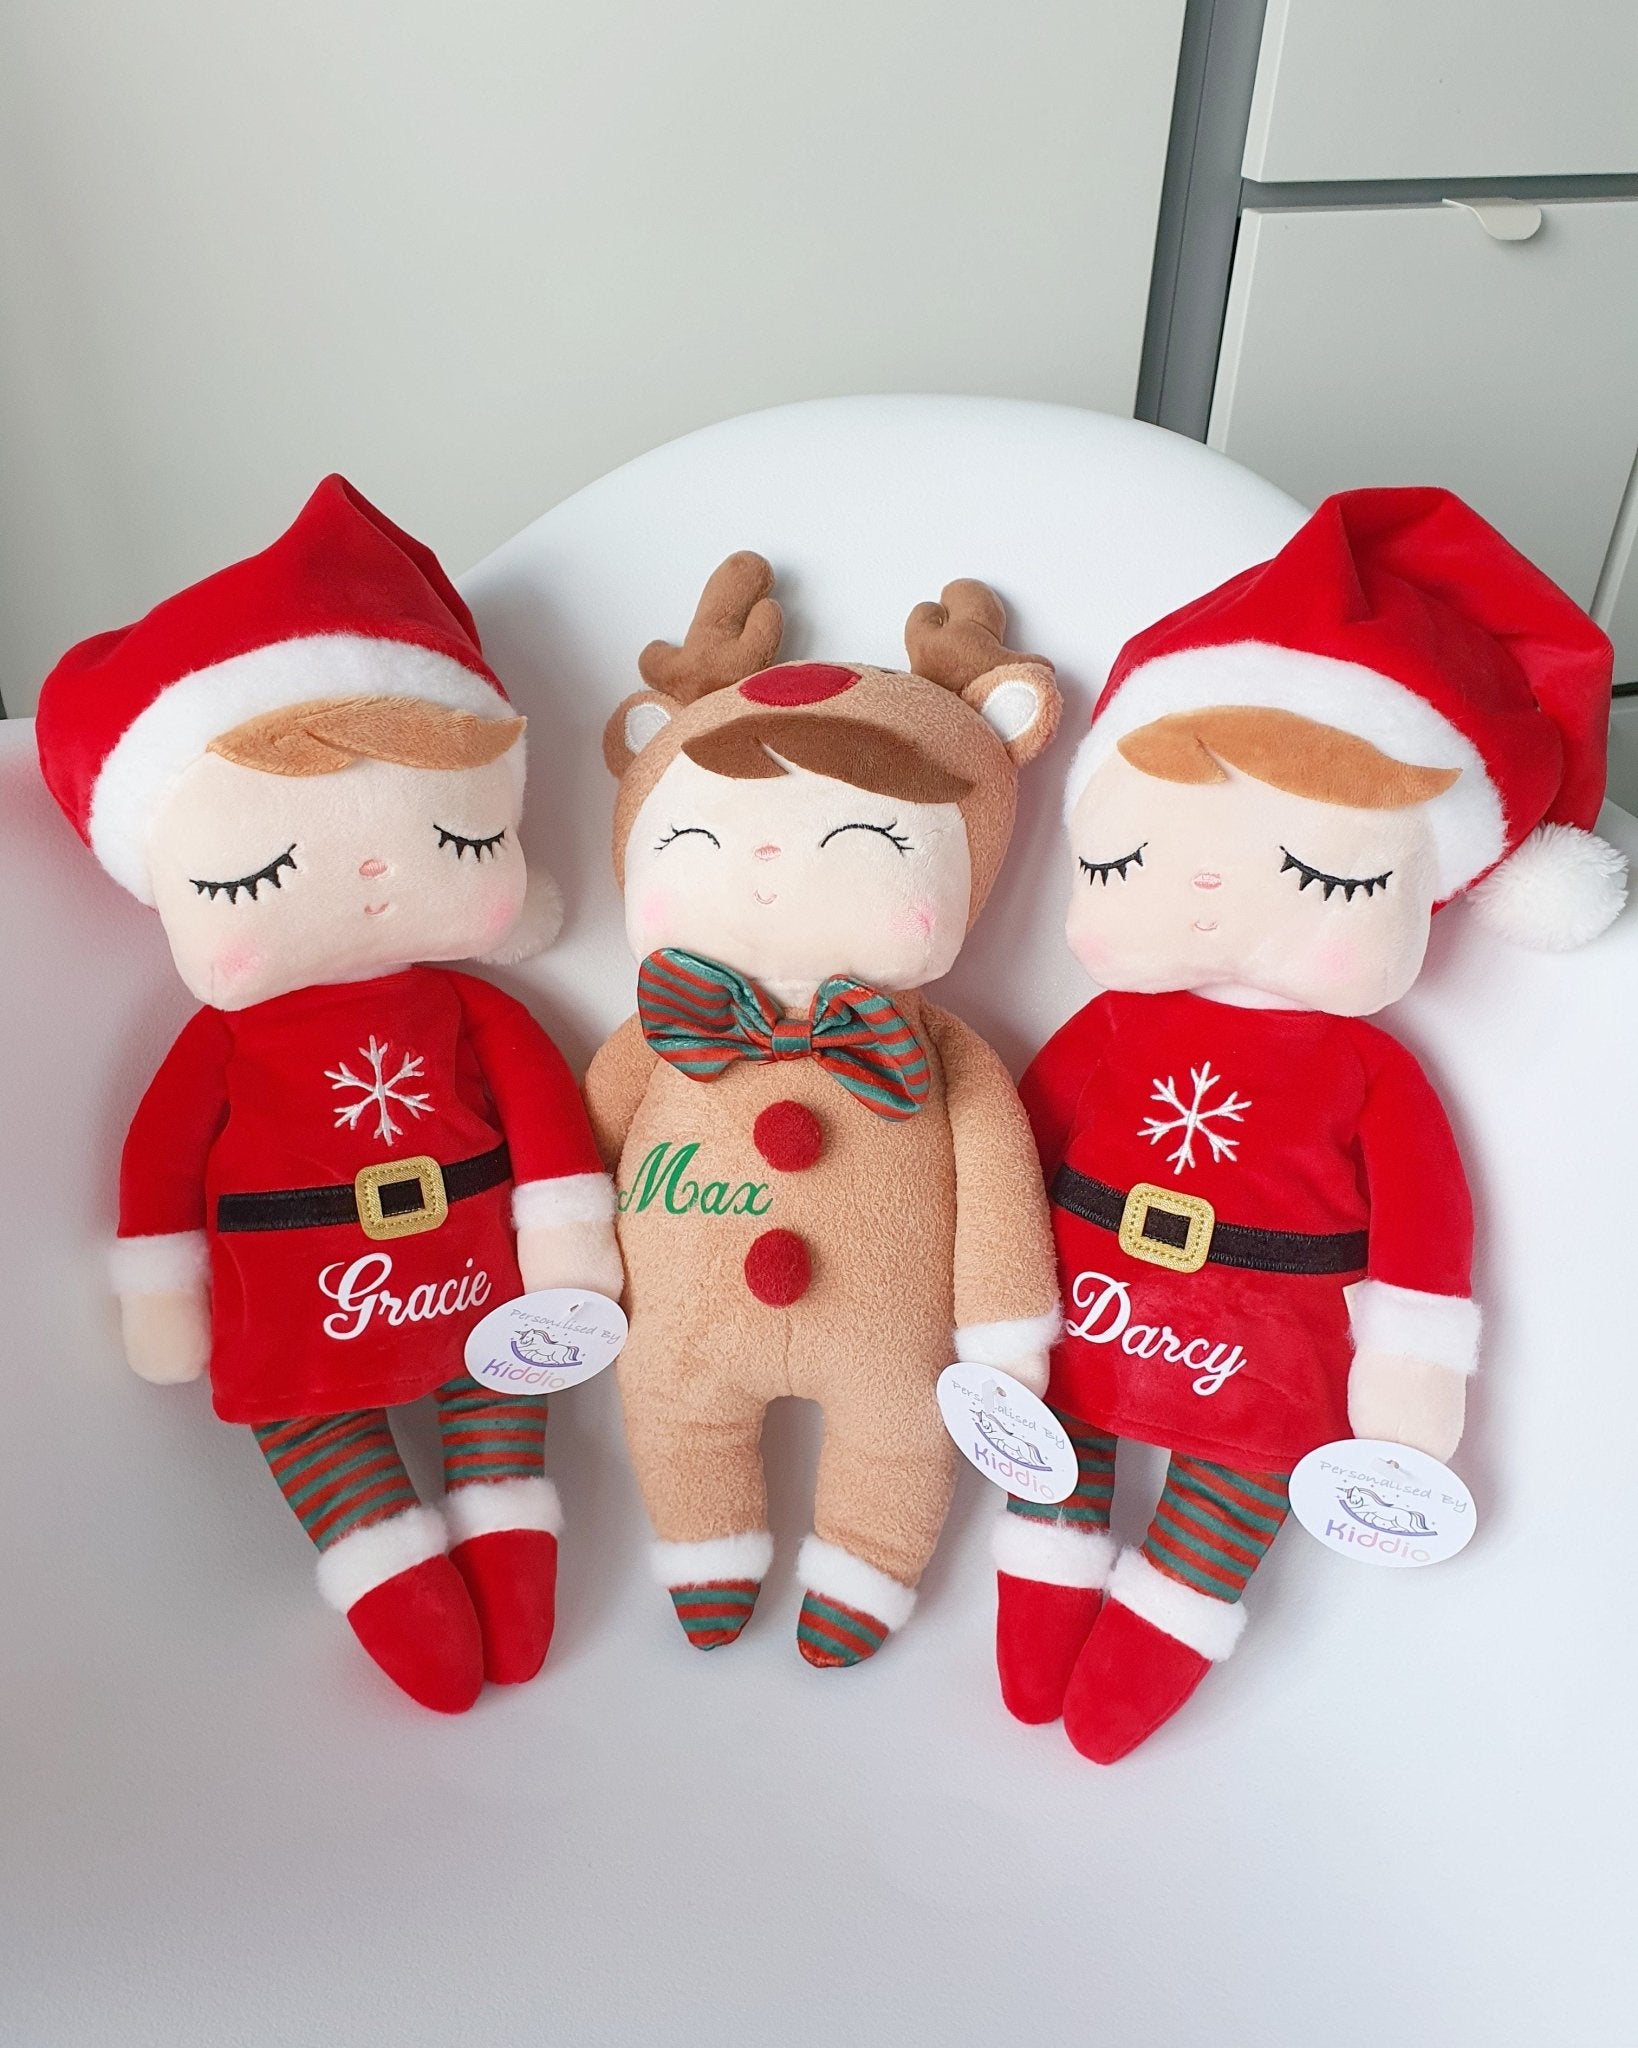 Personalised Christmas Mrs Claus or Reindeer Doll from MetooKiddioSoft Toys